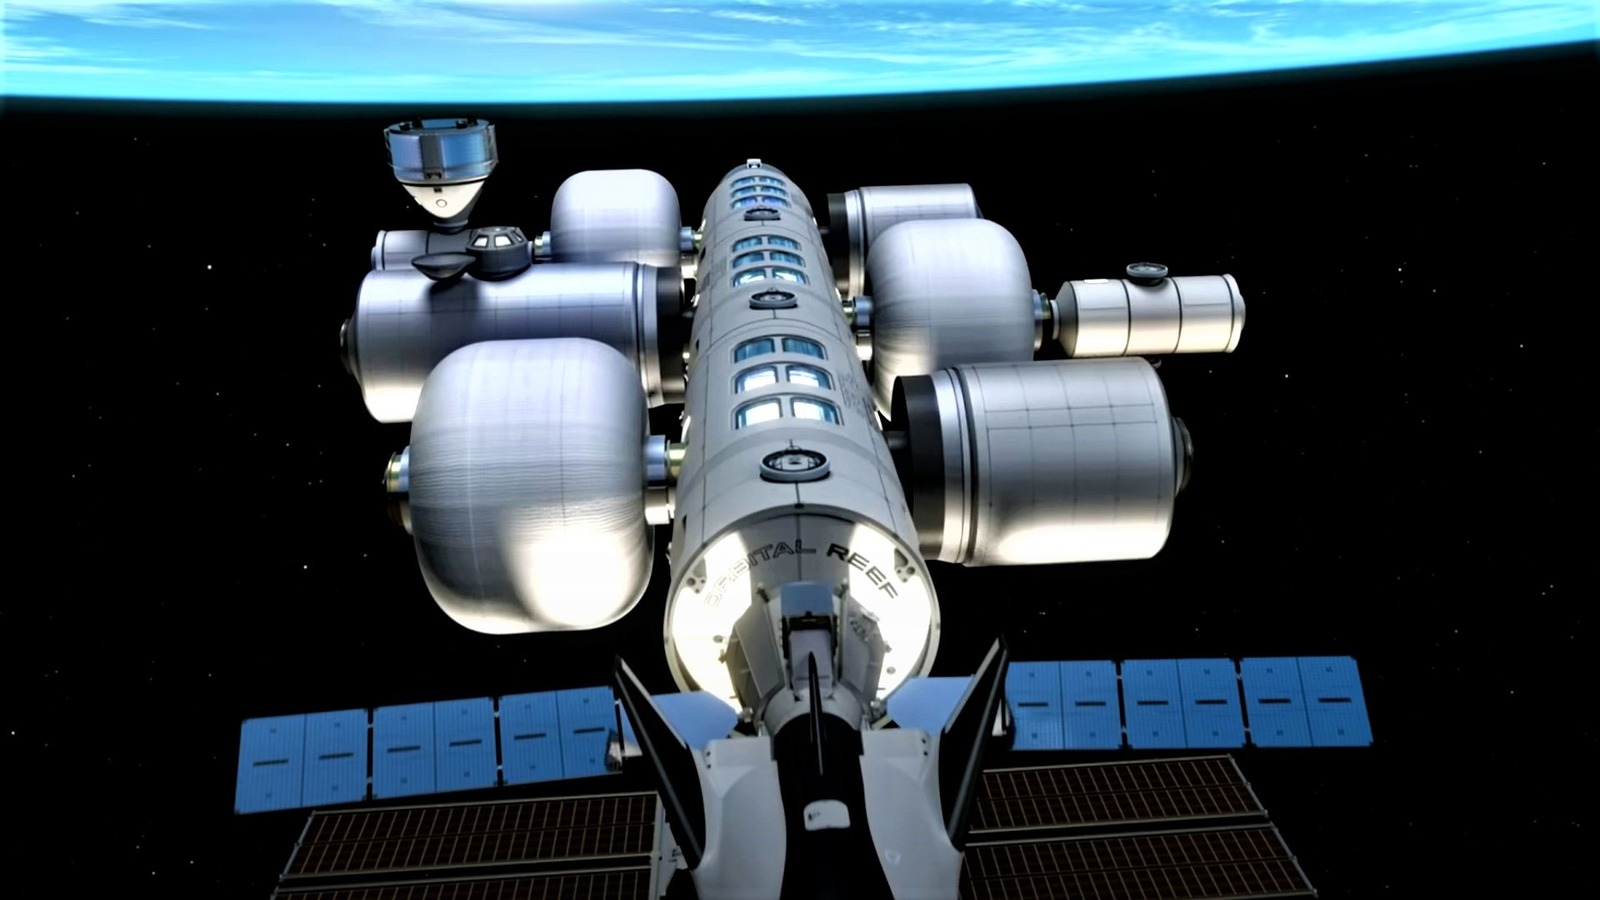 jeff-bezos-space-station-is-closer-to-reality-than-you-realize